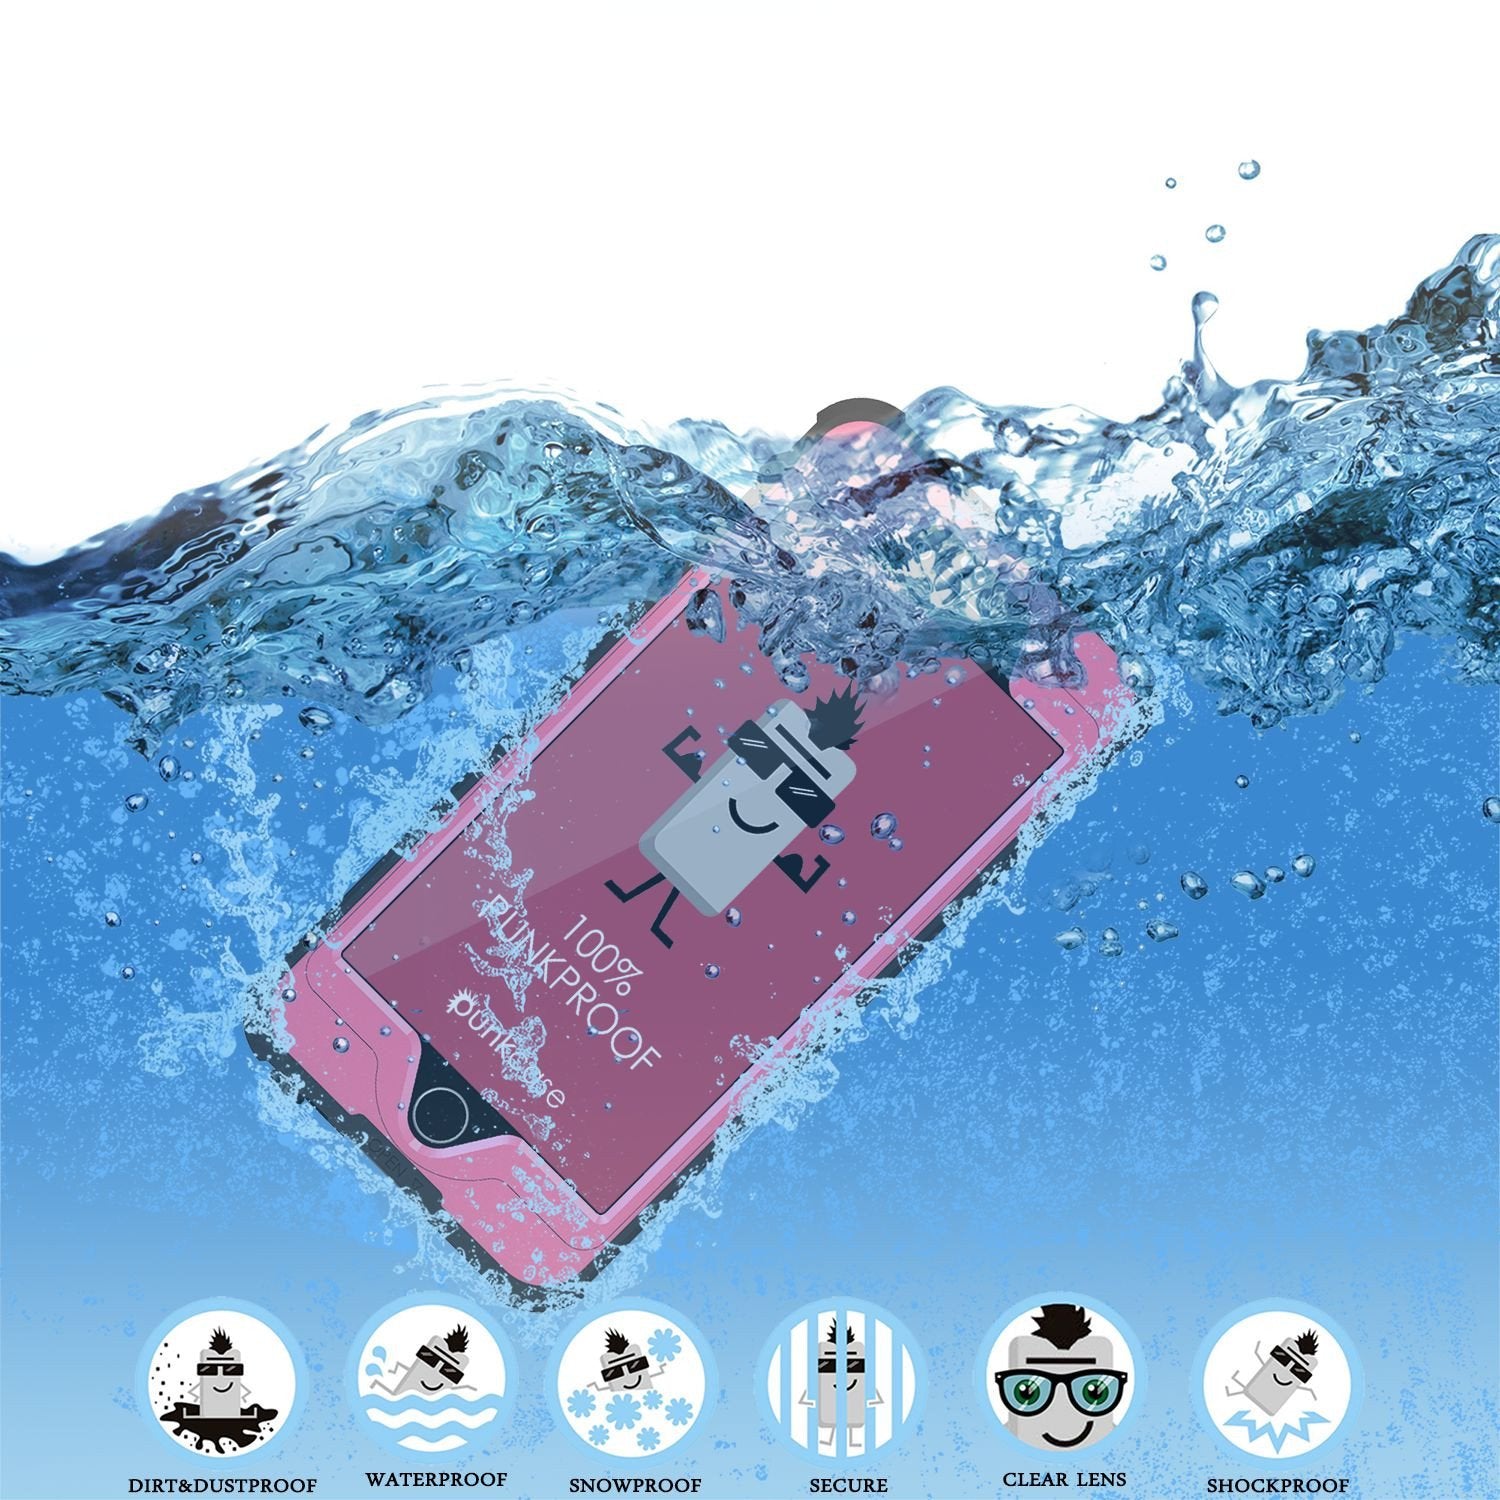 iPhone 6S+/6+ Plus Waterproof Case, PUNKcase StudStar Pink w/ Attached Screen Protector | Warranty